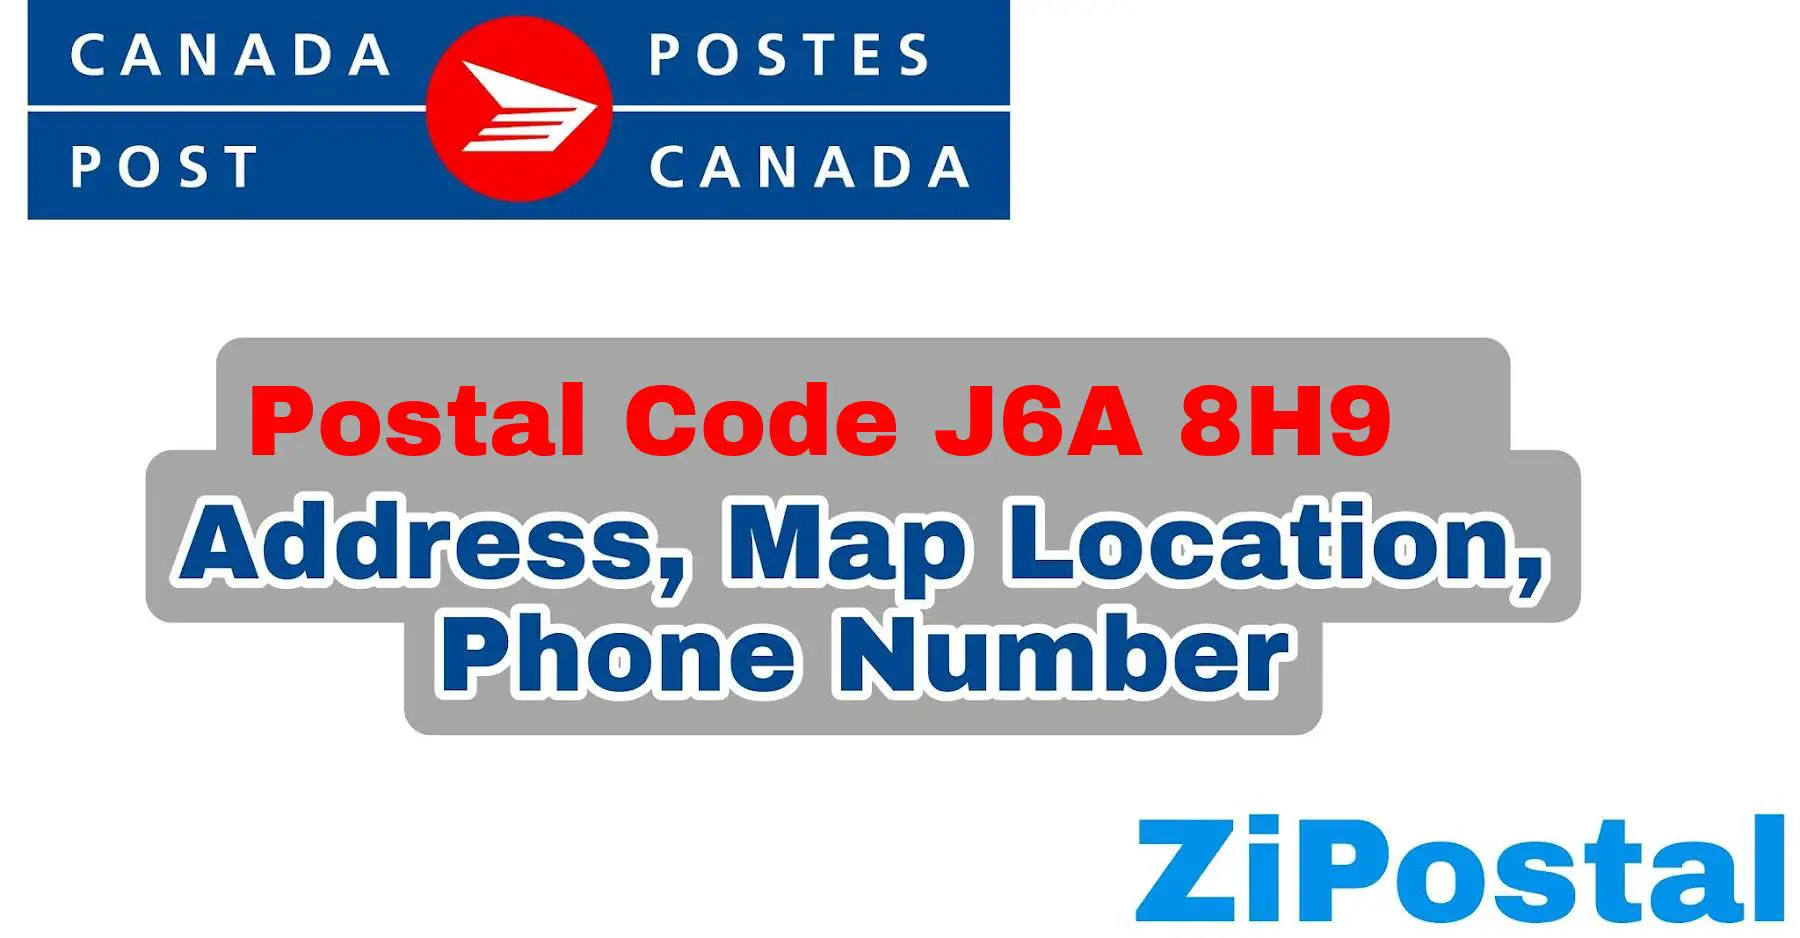 Postal Code J6A 8H9 Address Map Location and Phone Number